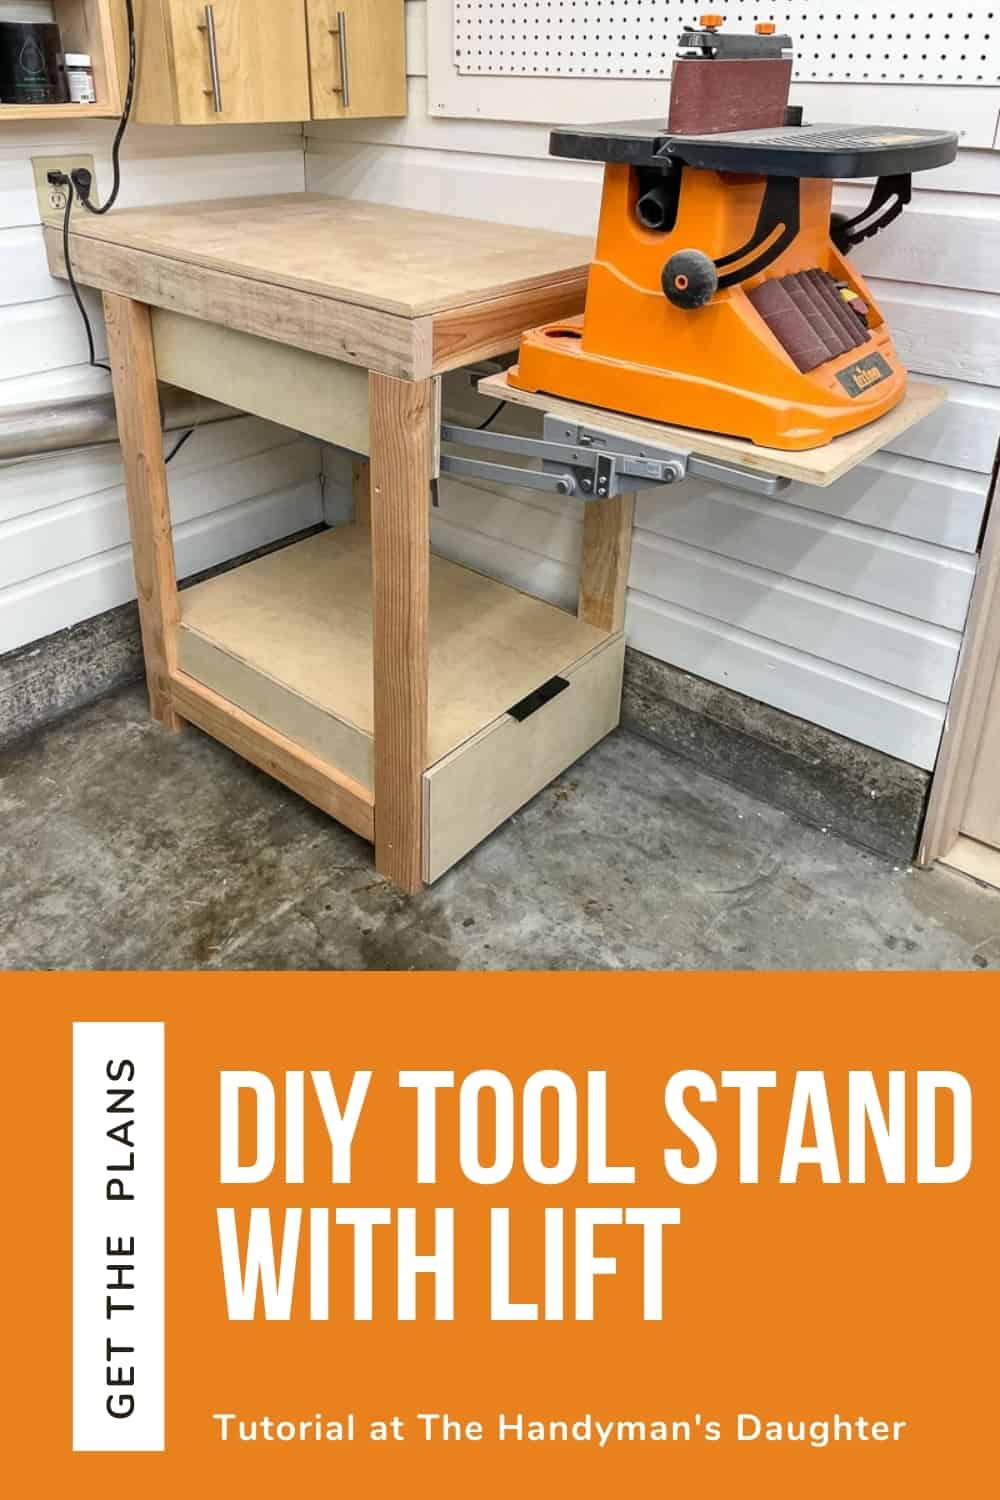 https://www.thehandymansdaughter.com/wp-content/uploads/2021/01/DIY-Tool-Stand-with-Lift-Pin-1.jpg